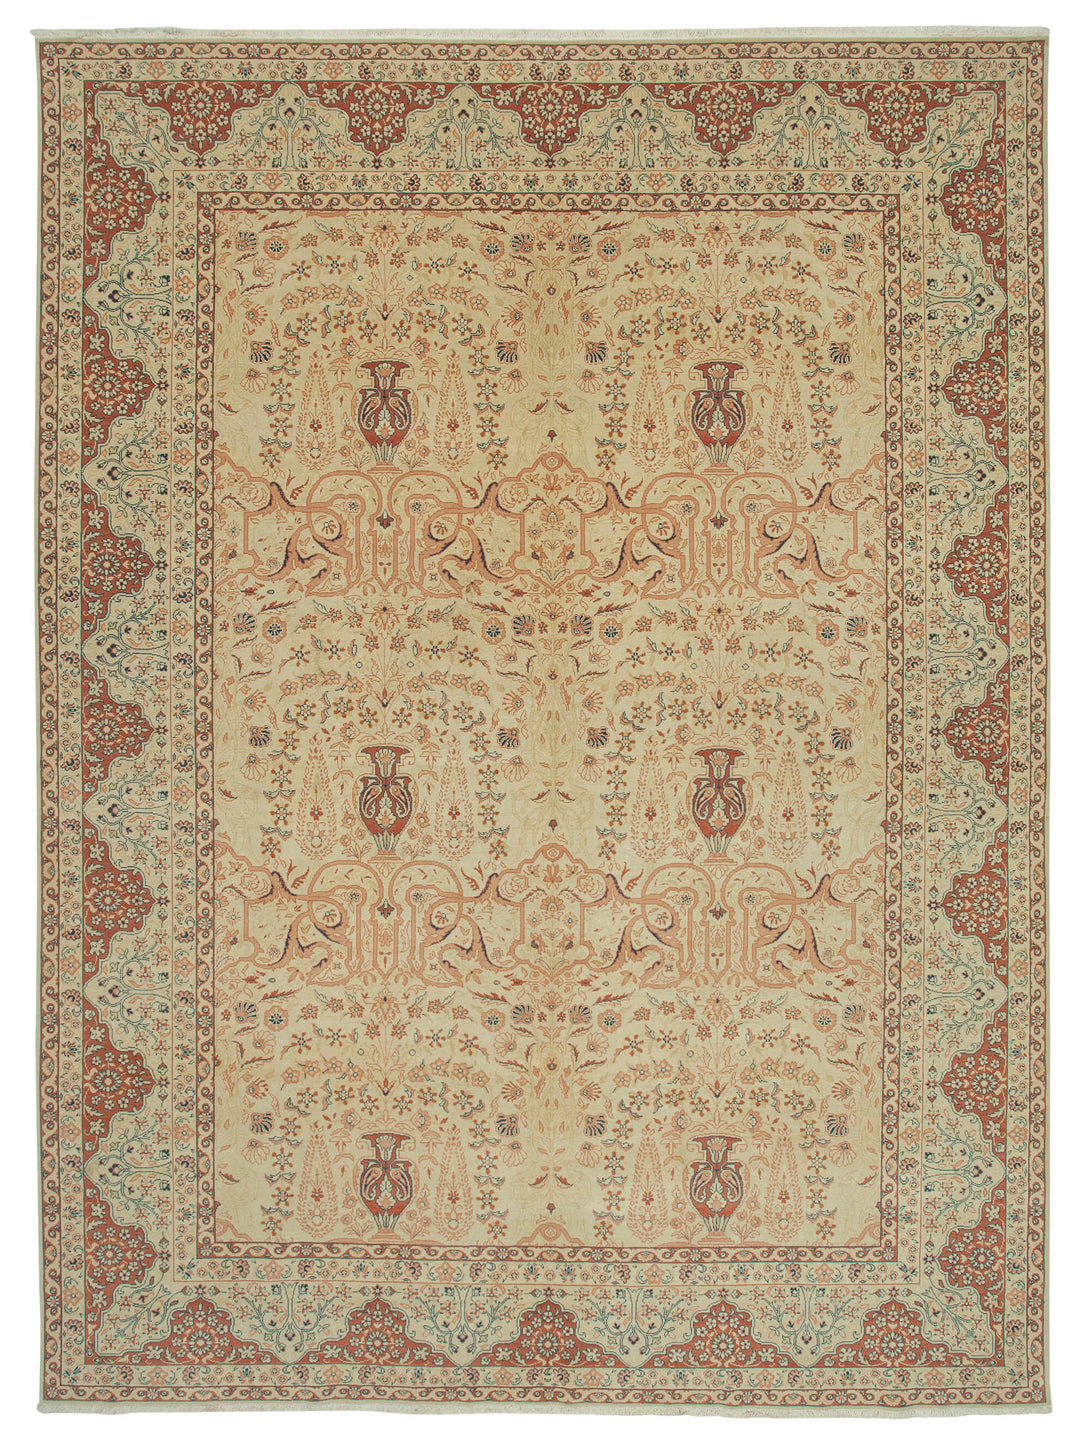 Handmade Oushak Area Rug > Design# OL-AC-33758 > Size: 10'-3" x 13'-10", Carpet Culture Rugs, Handmade Rugs, NYC Rugs, New Rugs, Shop Rugs, Rug Store, Outlet Rugs, SoHo Rugs, Rugs in USA